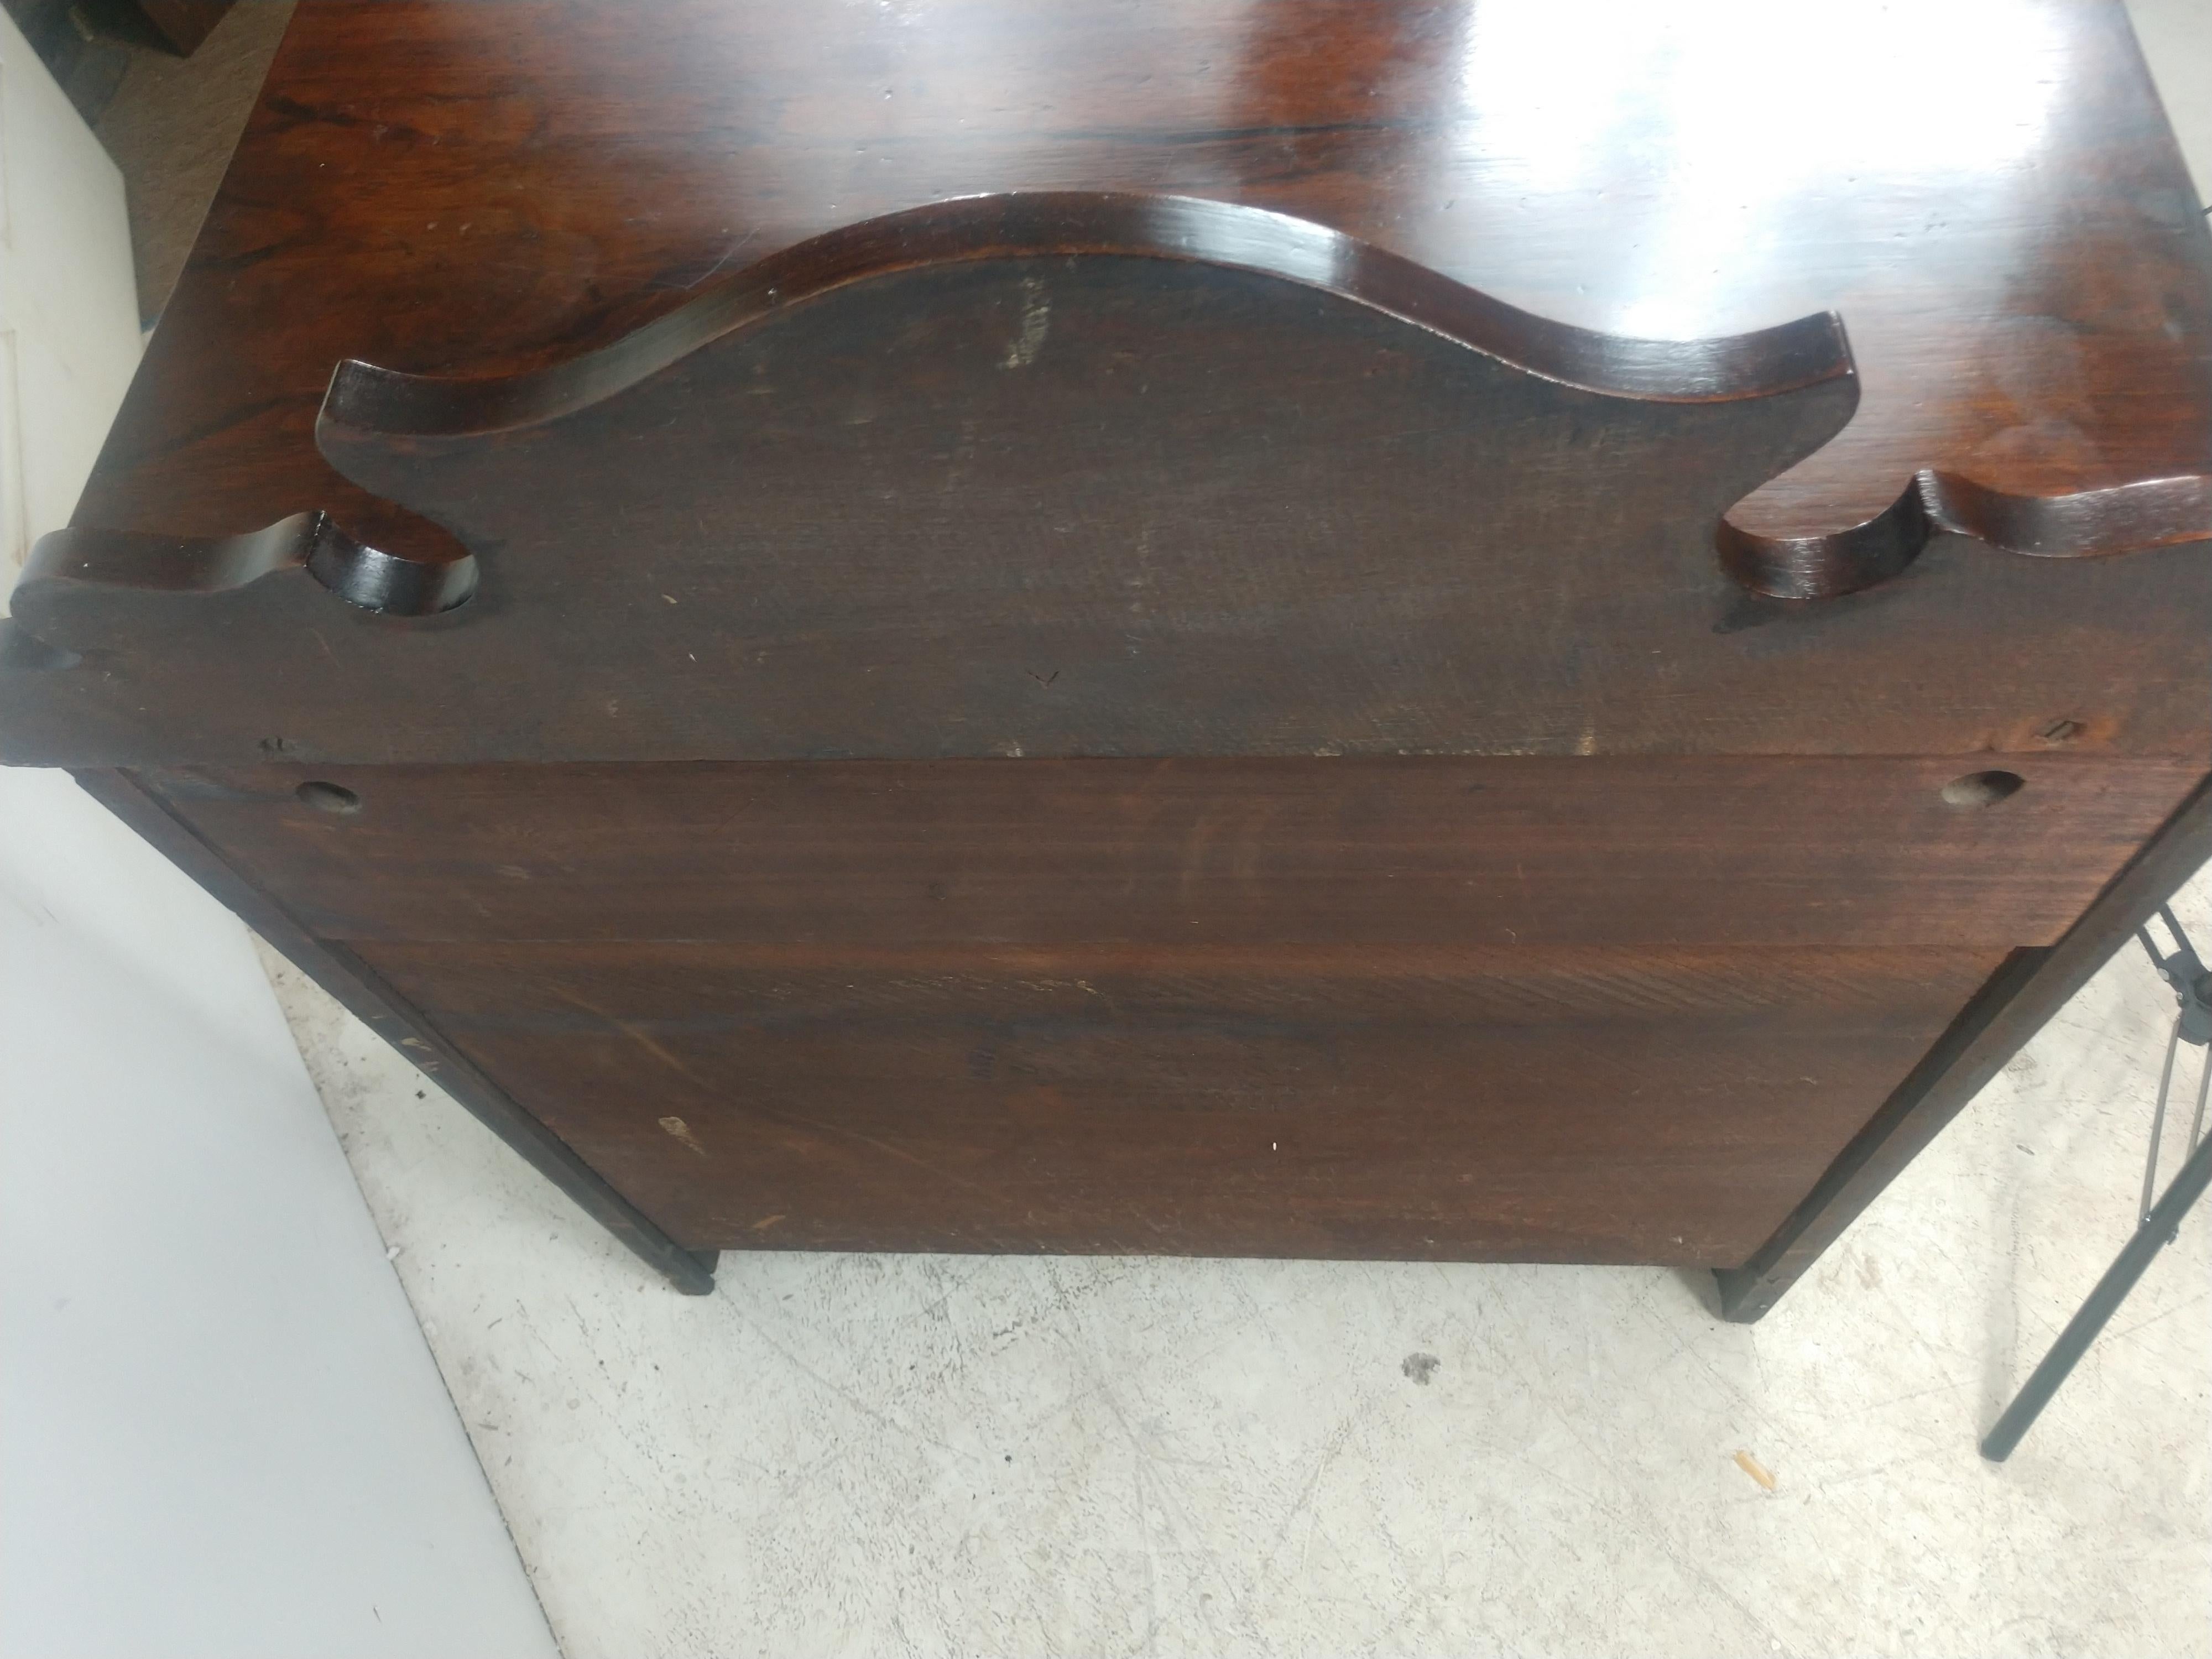 C1860 Rosewood 3 drawer commode / dresser. Great for a small area, bath entry or guest bedroom. All original and in very good condition with minimal wear. Wood has separated on the sides which is typical for it's age.